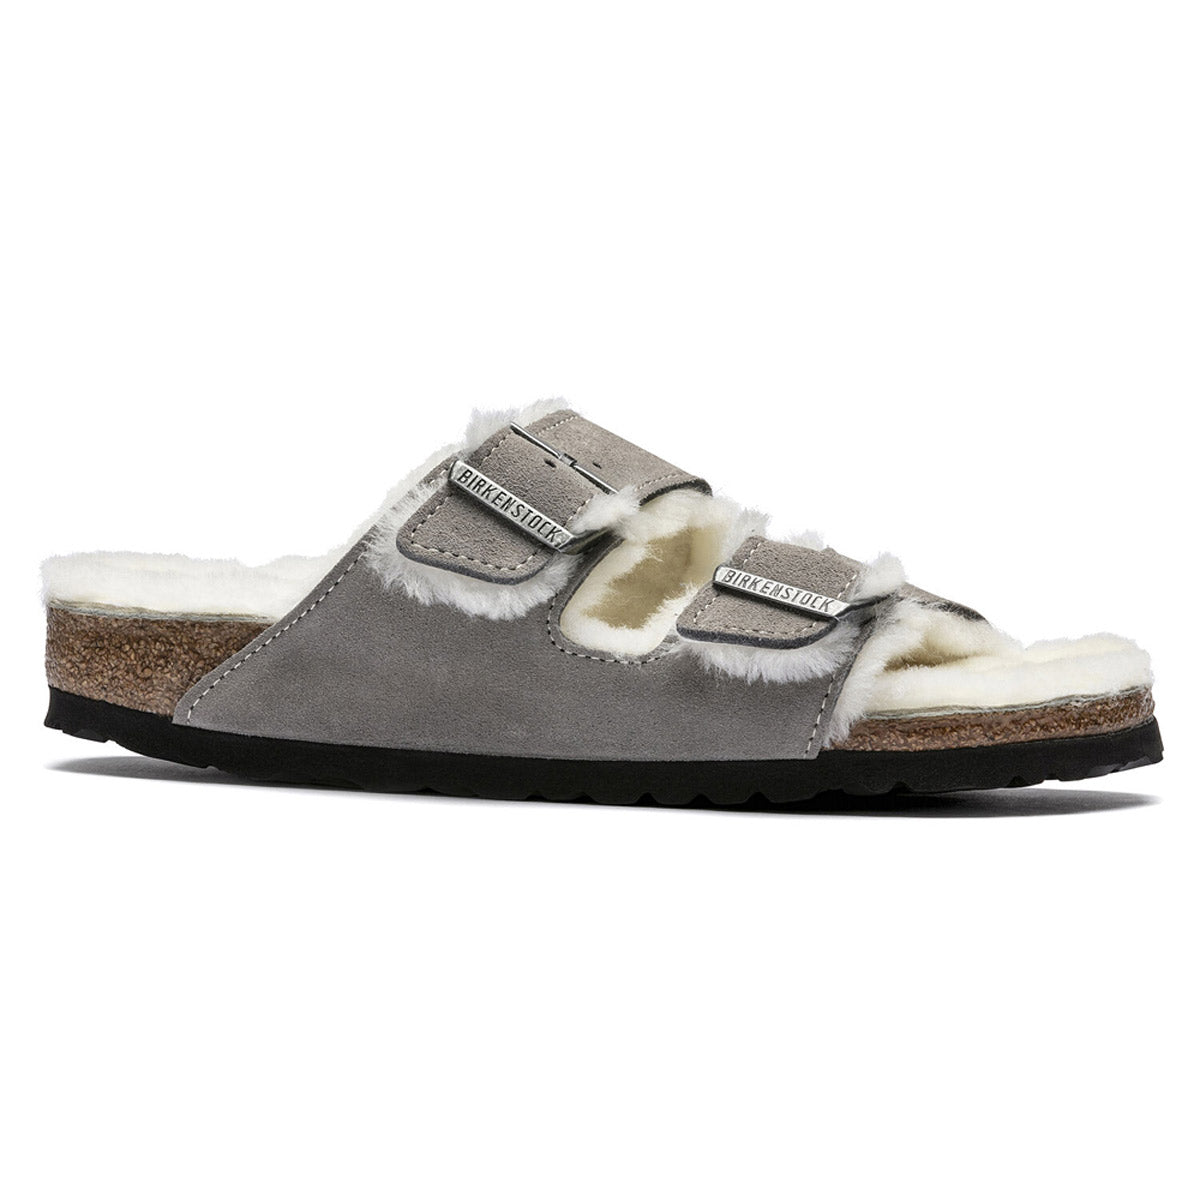 A single grey suede shearling Birkenstock Arizona sandal with adjustable straps and a cork-latex footbed.